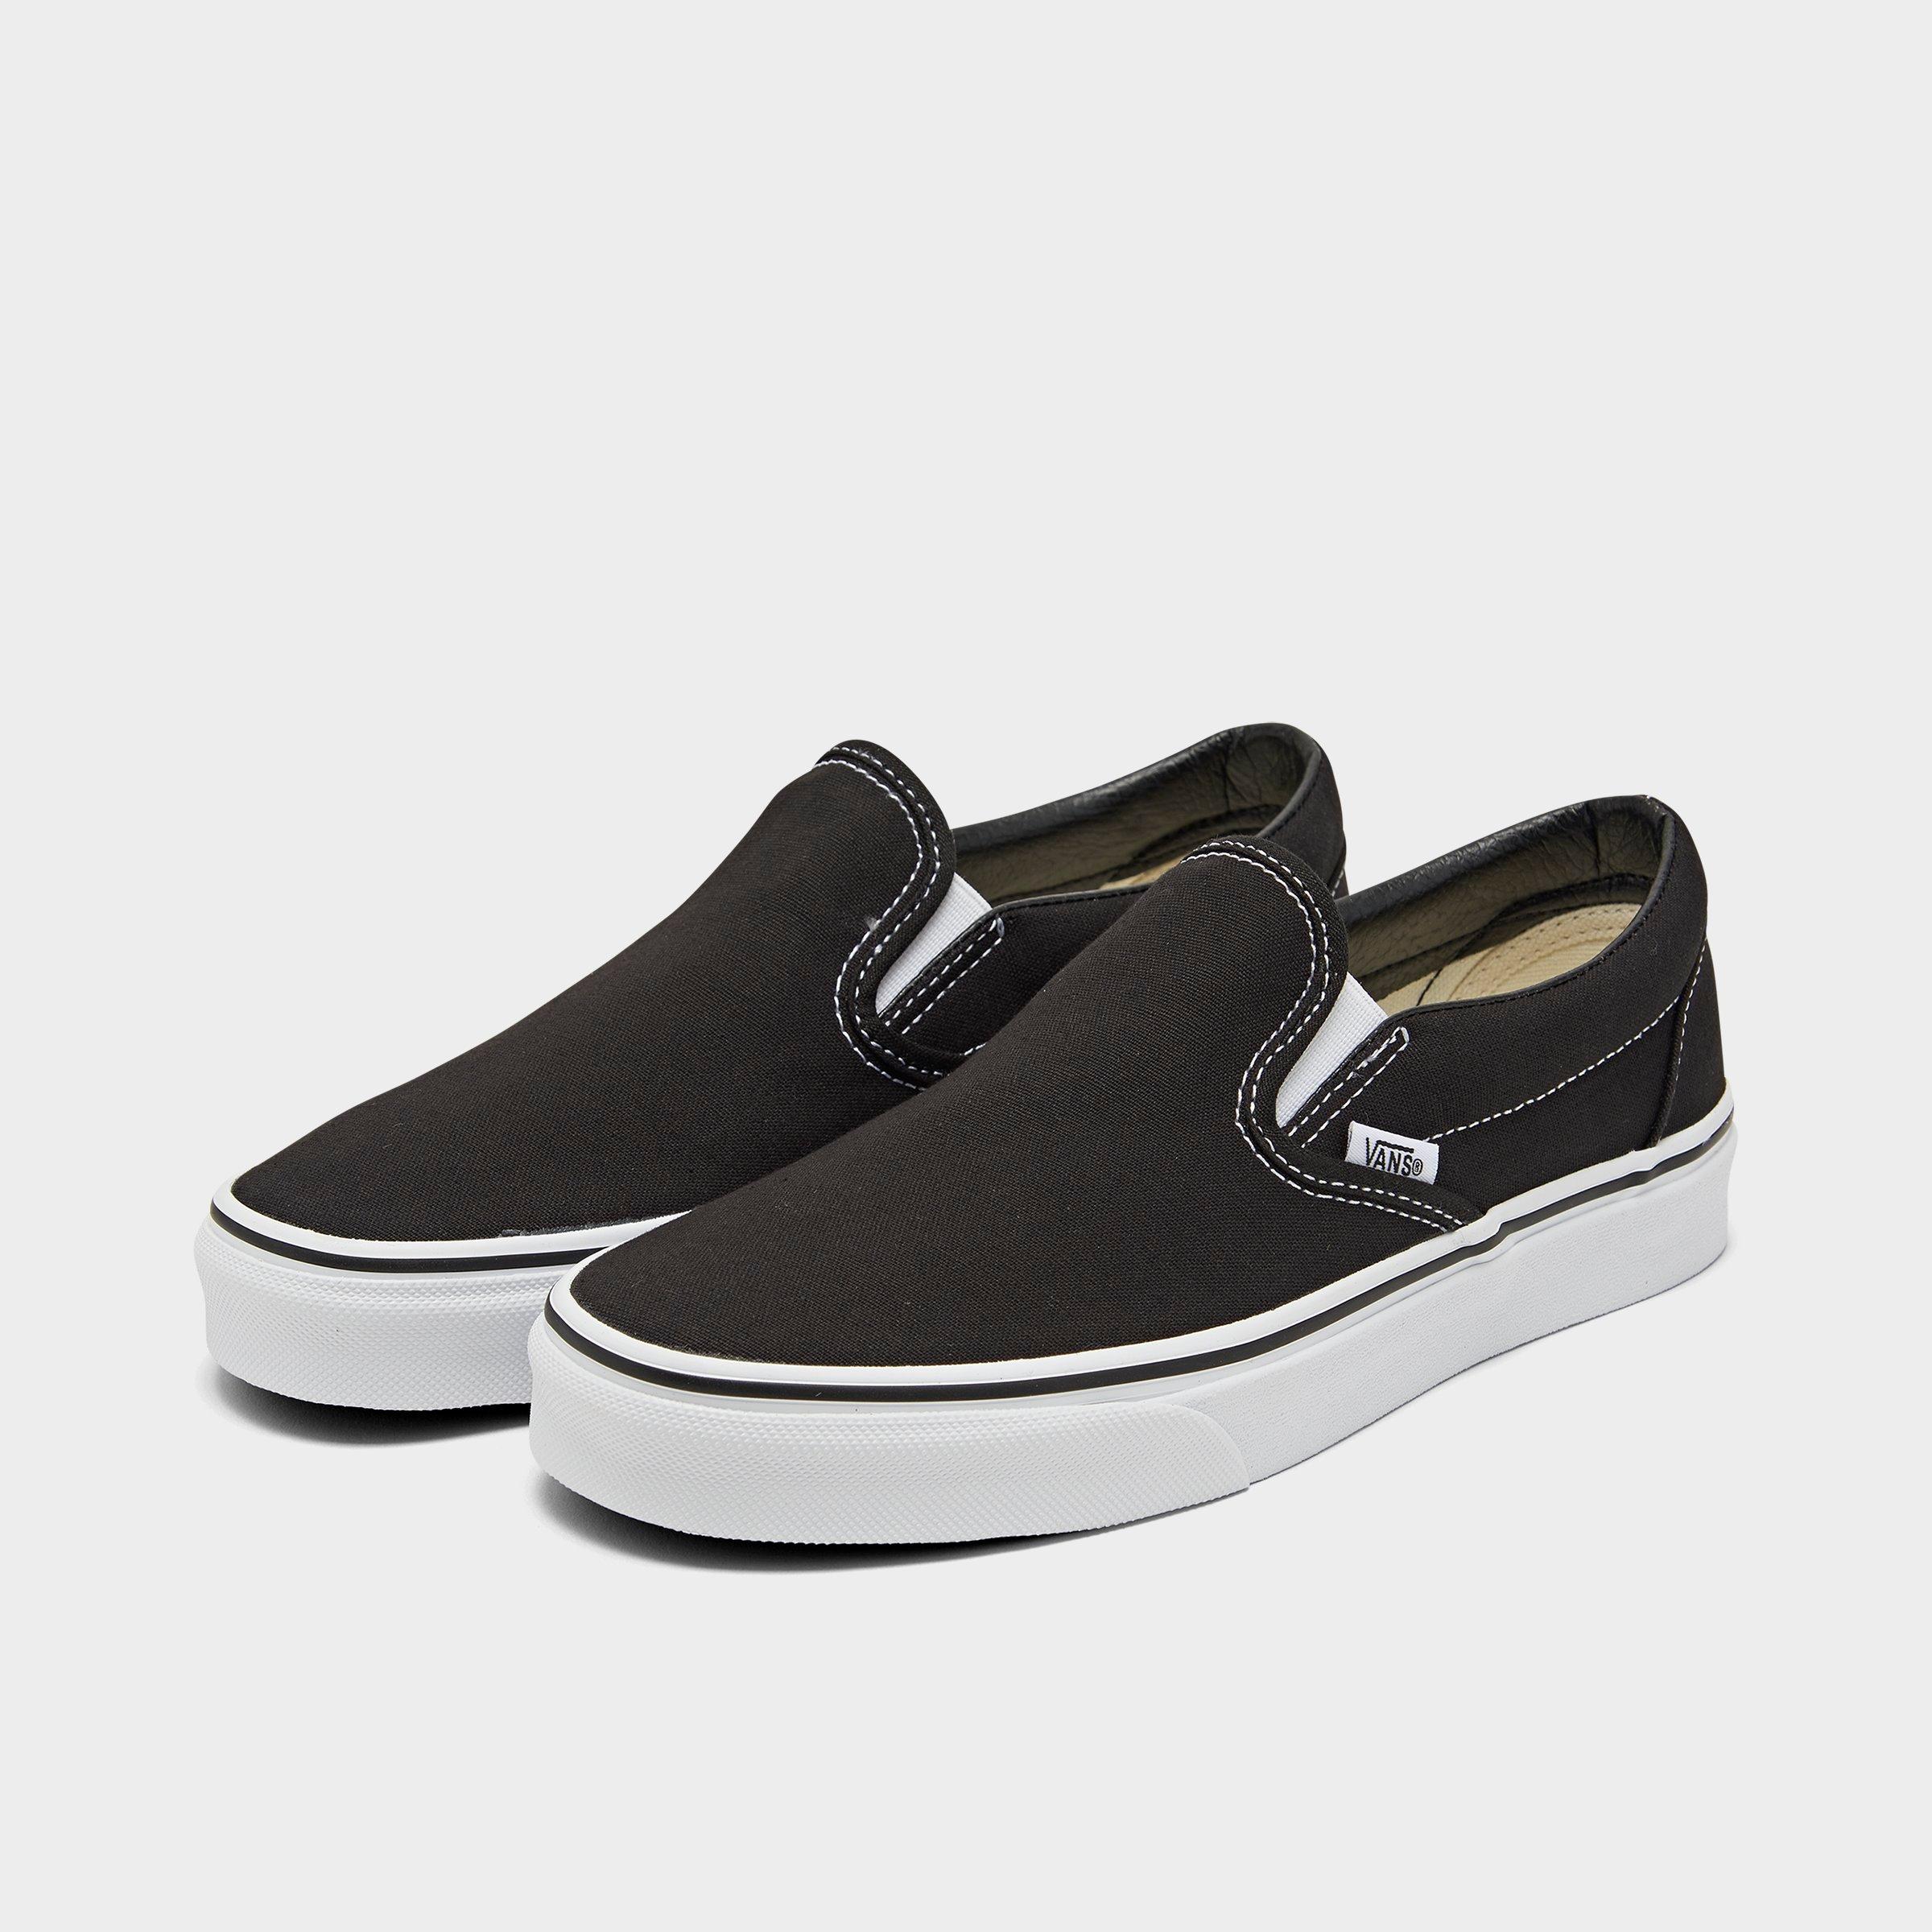 Vans Classic Slip-On Casual Shoes| JD 